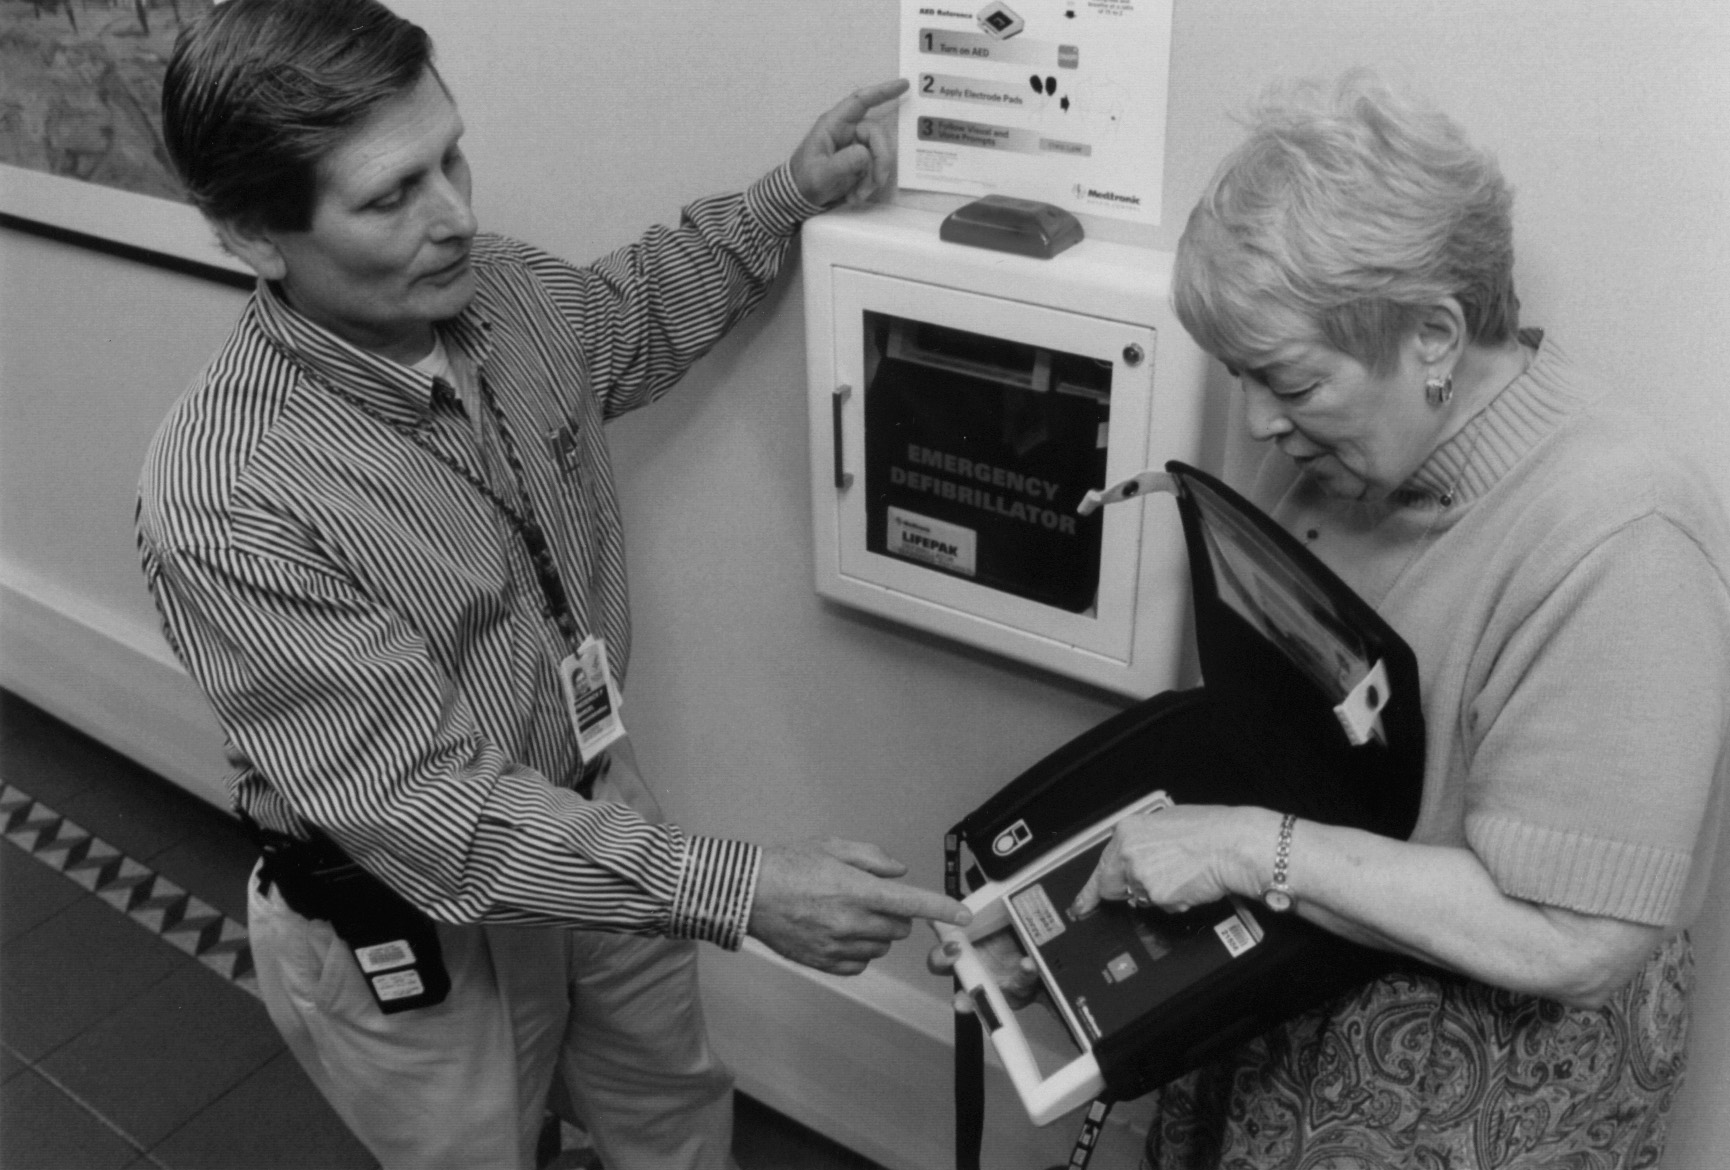 Photo of Fredrick Manuel and Jerry Taylor demonstrating the defibrillator